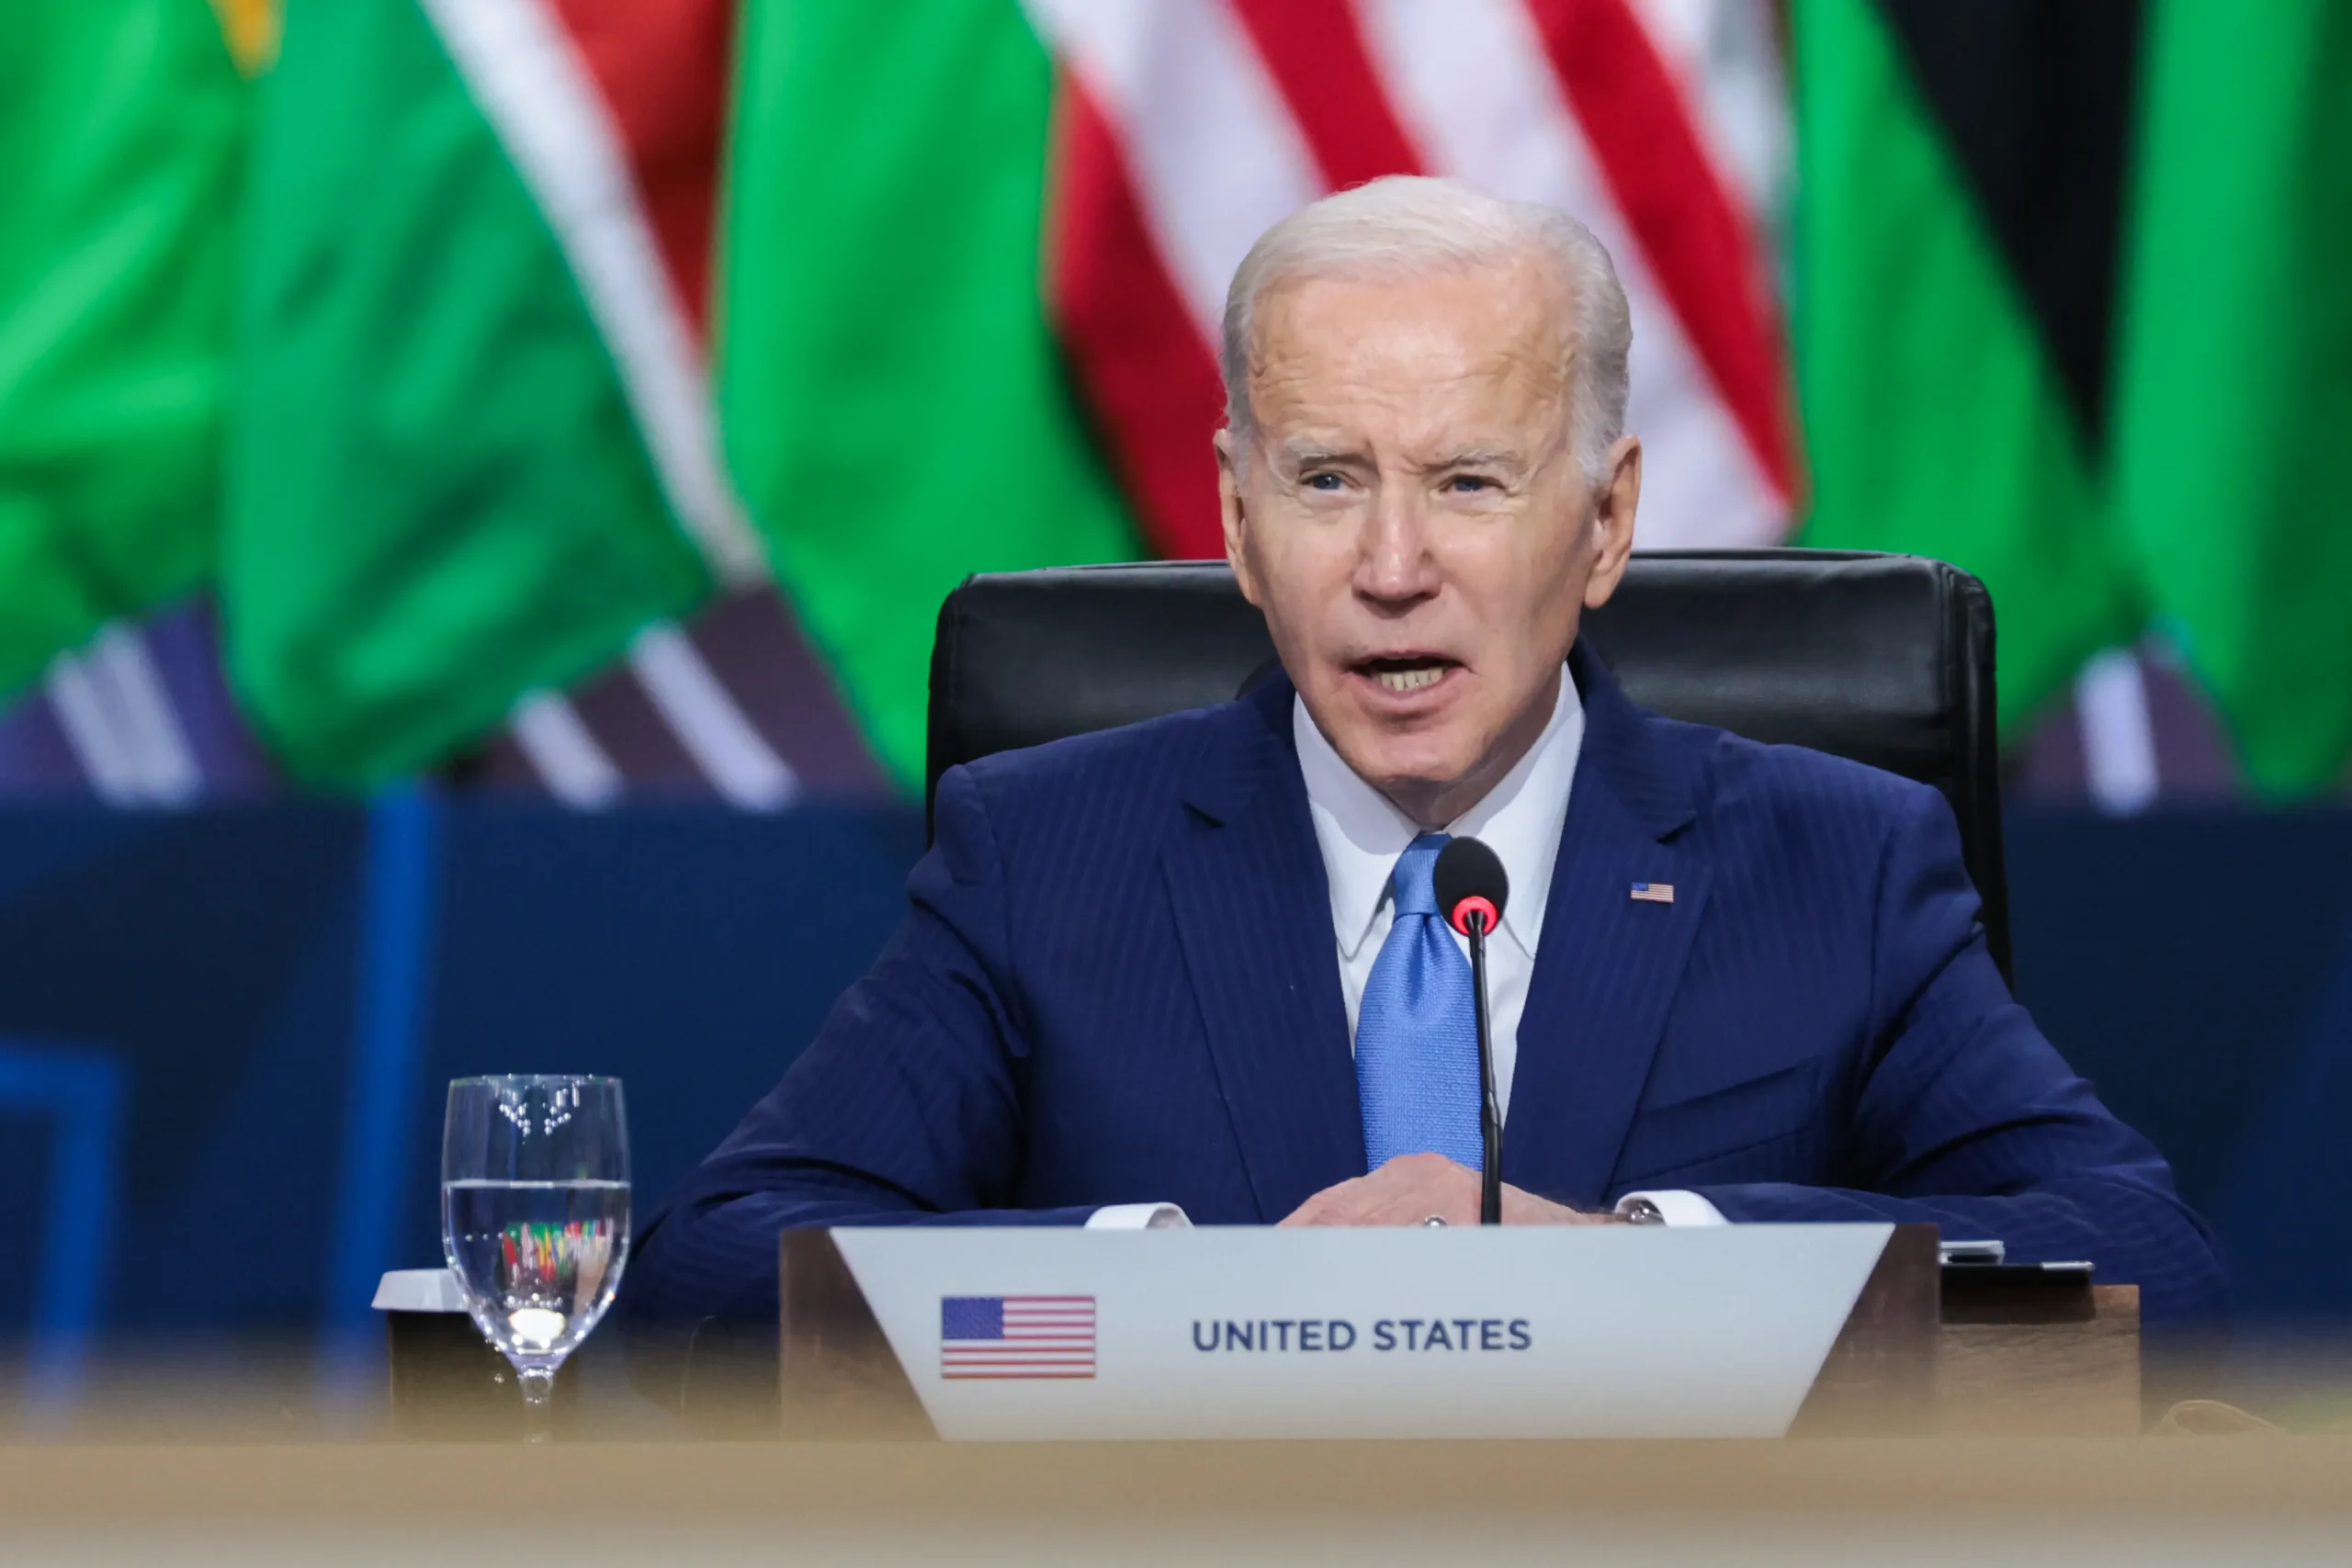 Biden's Midterm Report Card: Americans Grade Him On Economy, Immigration, Foreign Relations And Climate Change